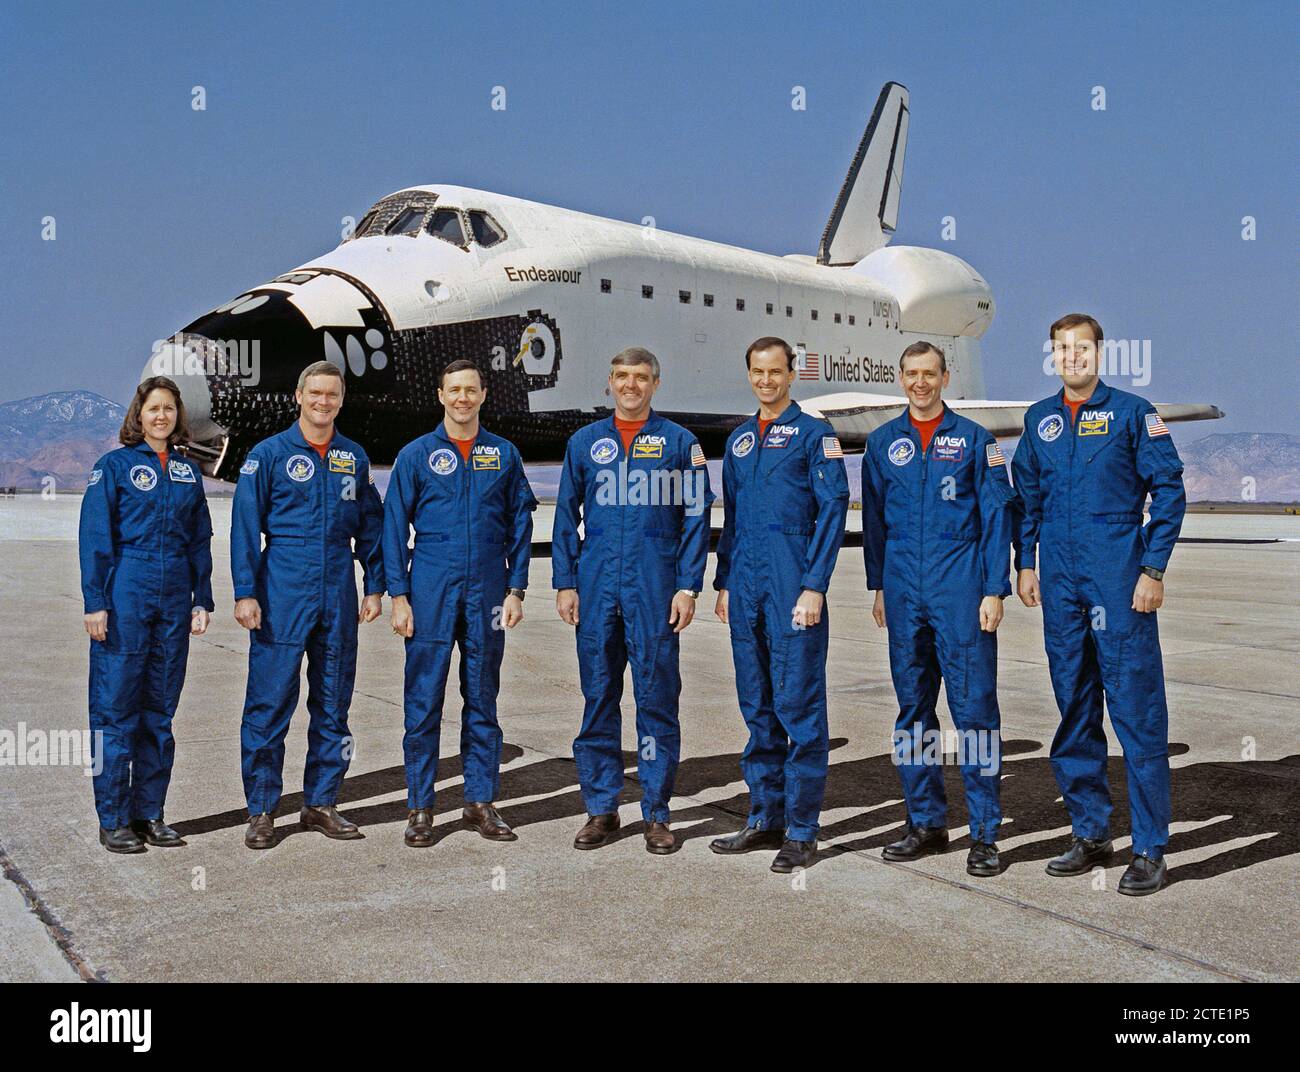 (16 Jan. 1992) --- These seven NASA astronauts are currently training for the first flight of the Space Shuttle Endeavour, seen in the background. Daniel C. Brandenstein, center, is mission commander; and Kevin P. Chilton, third from right, is pilot. Mission specialists are, left to right, Kathryn Thornton, Bruce Melnick, Pierre Thout, Thomas Akers and Richard Hieb. Stock Photo